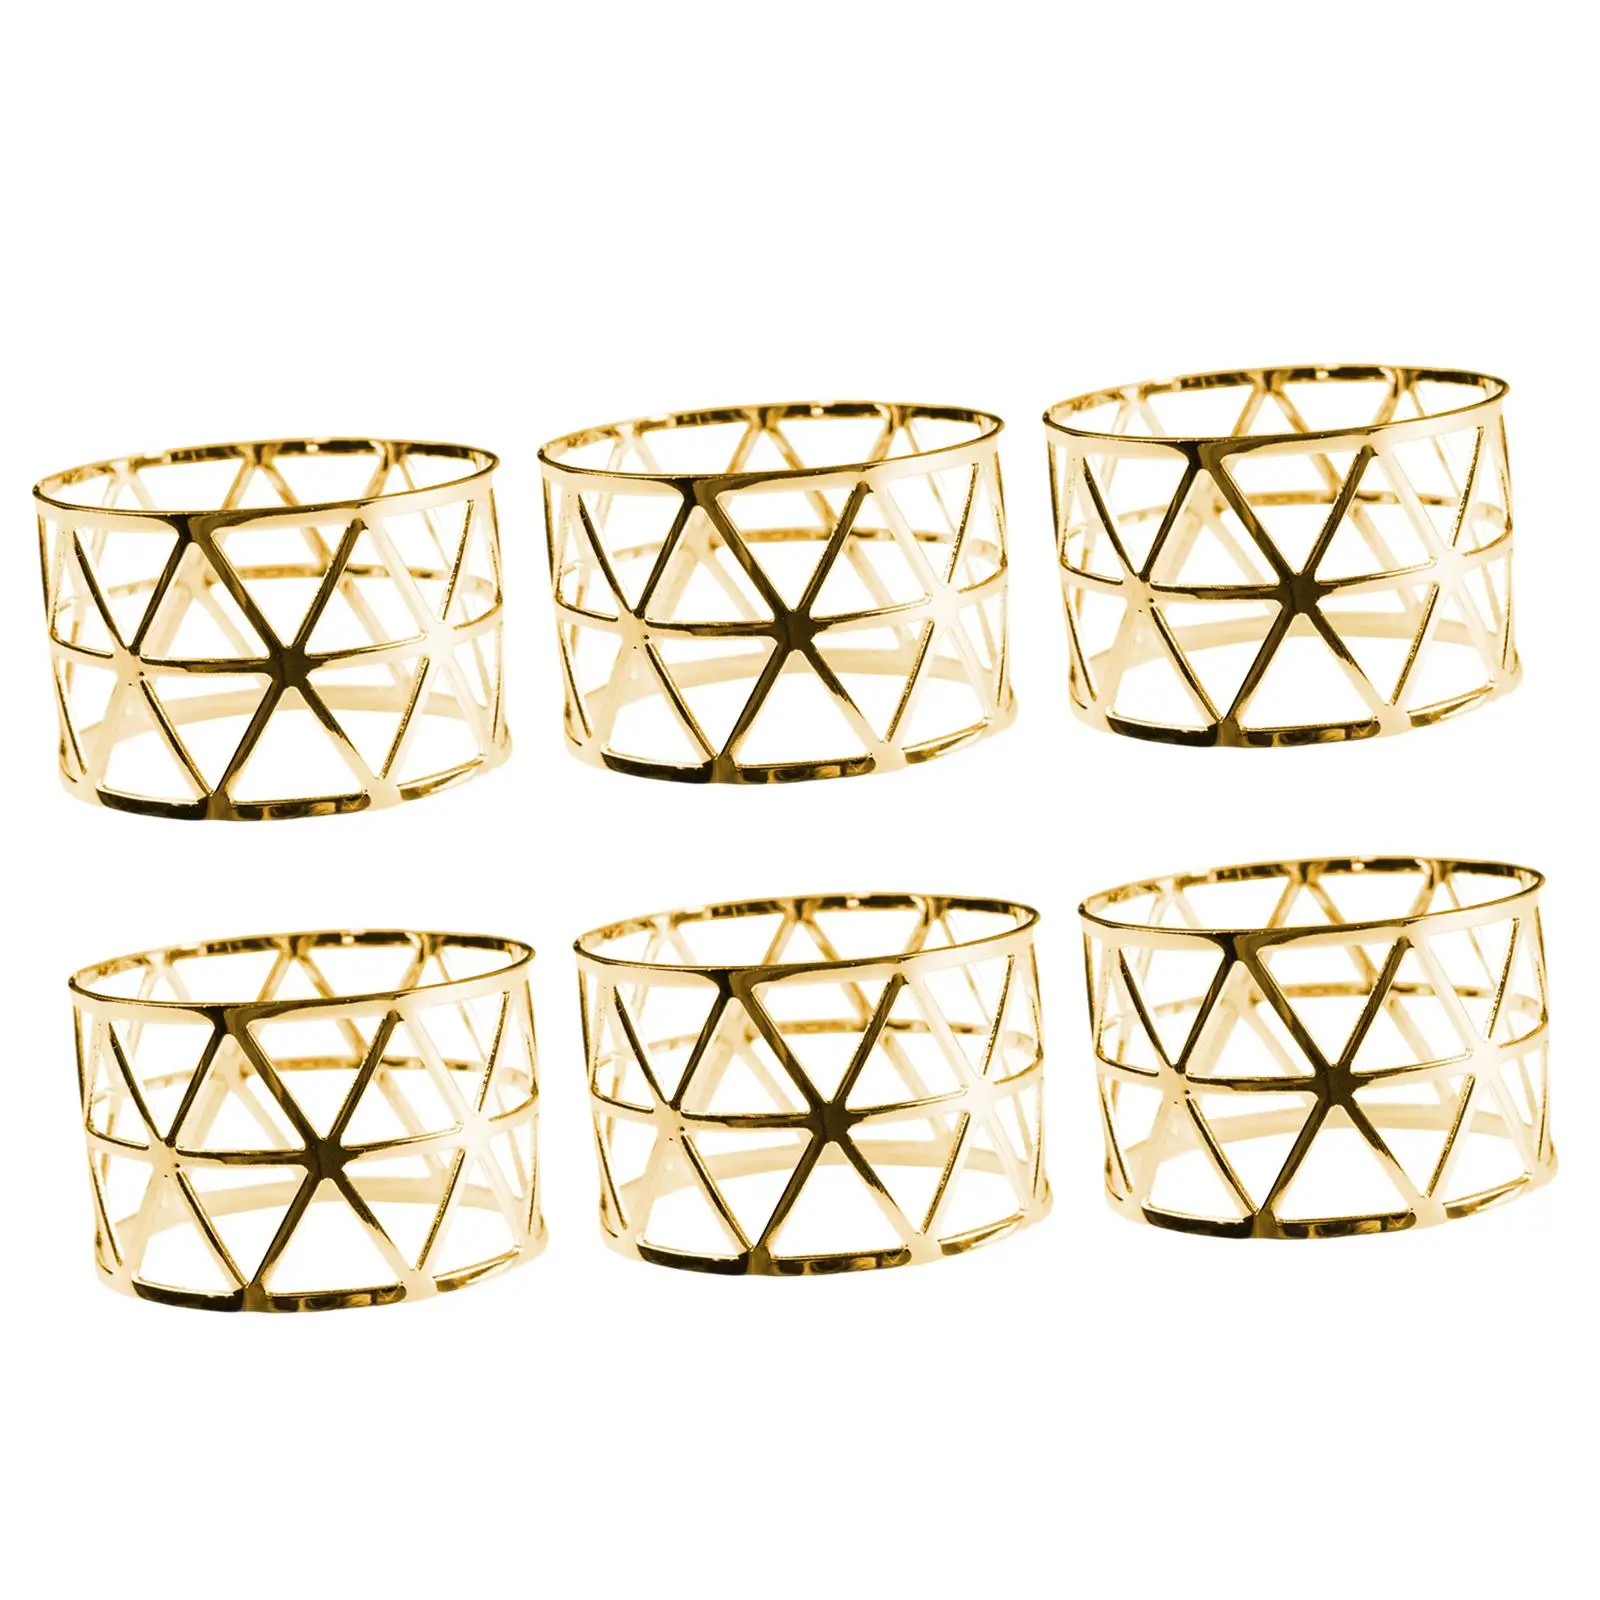 6x Crafts Napkin Holder Hollow Metal Mesh Napkin Buckles for Wedding Holiday